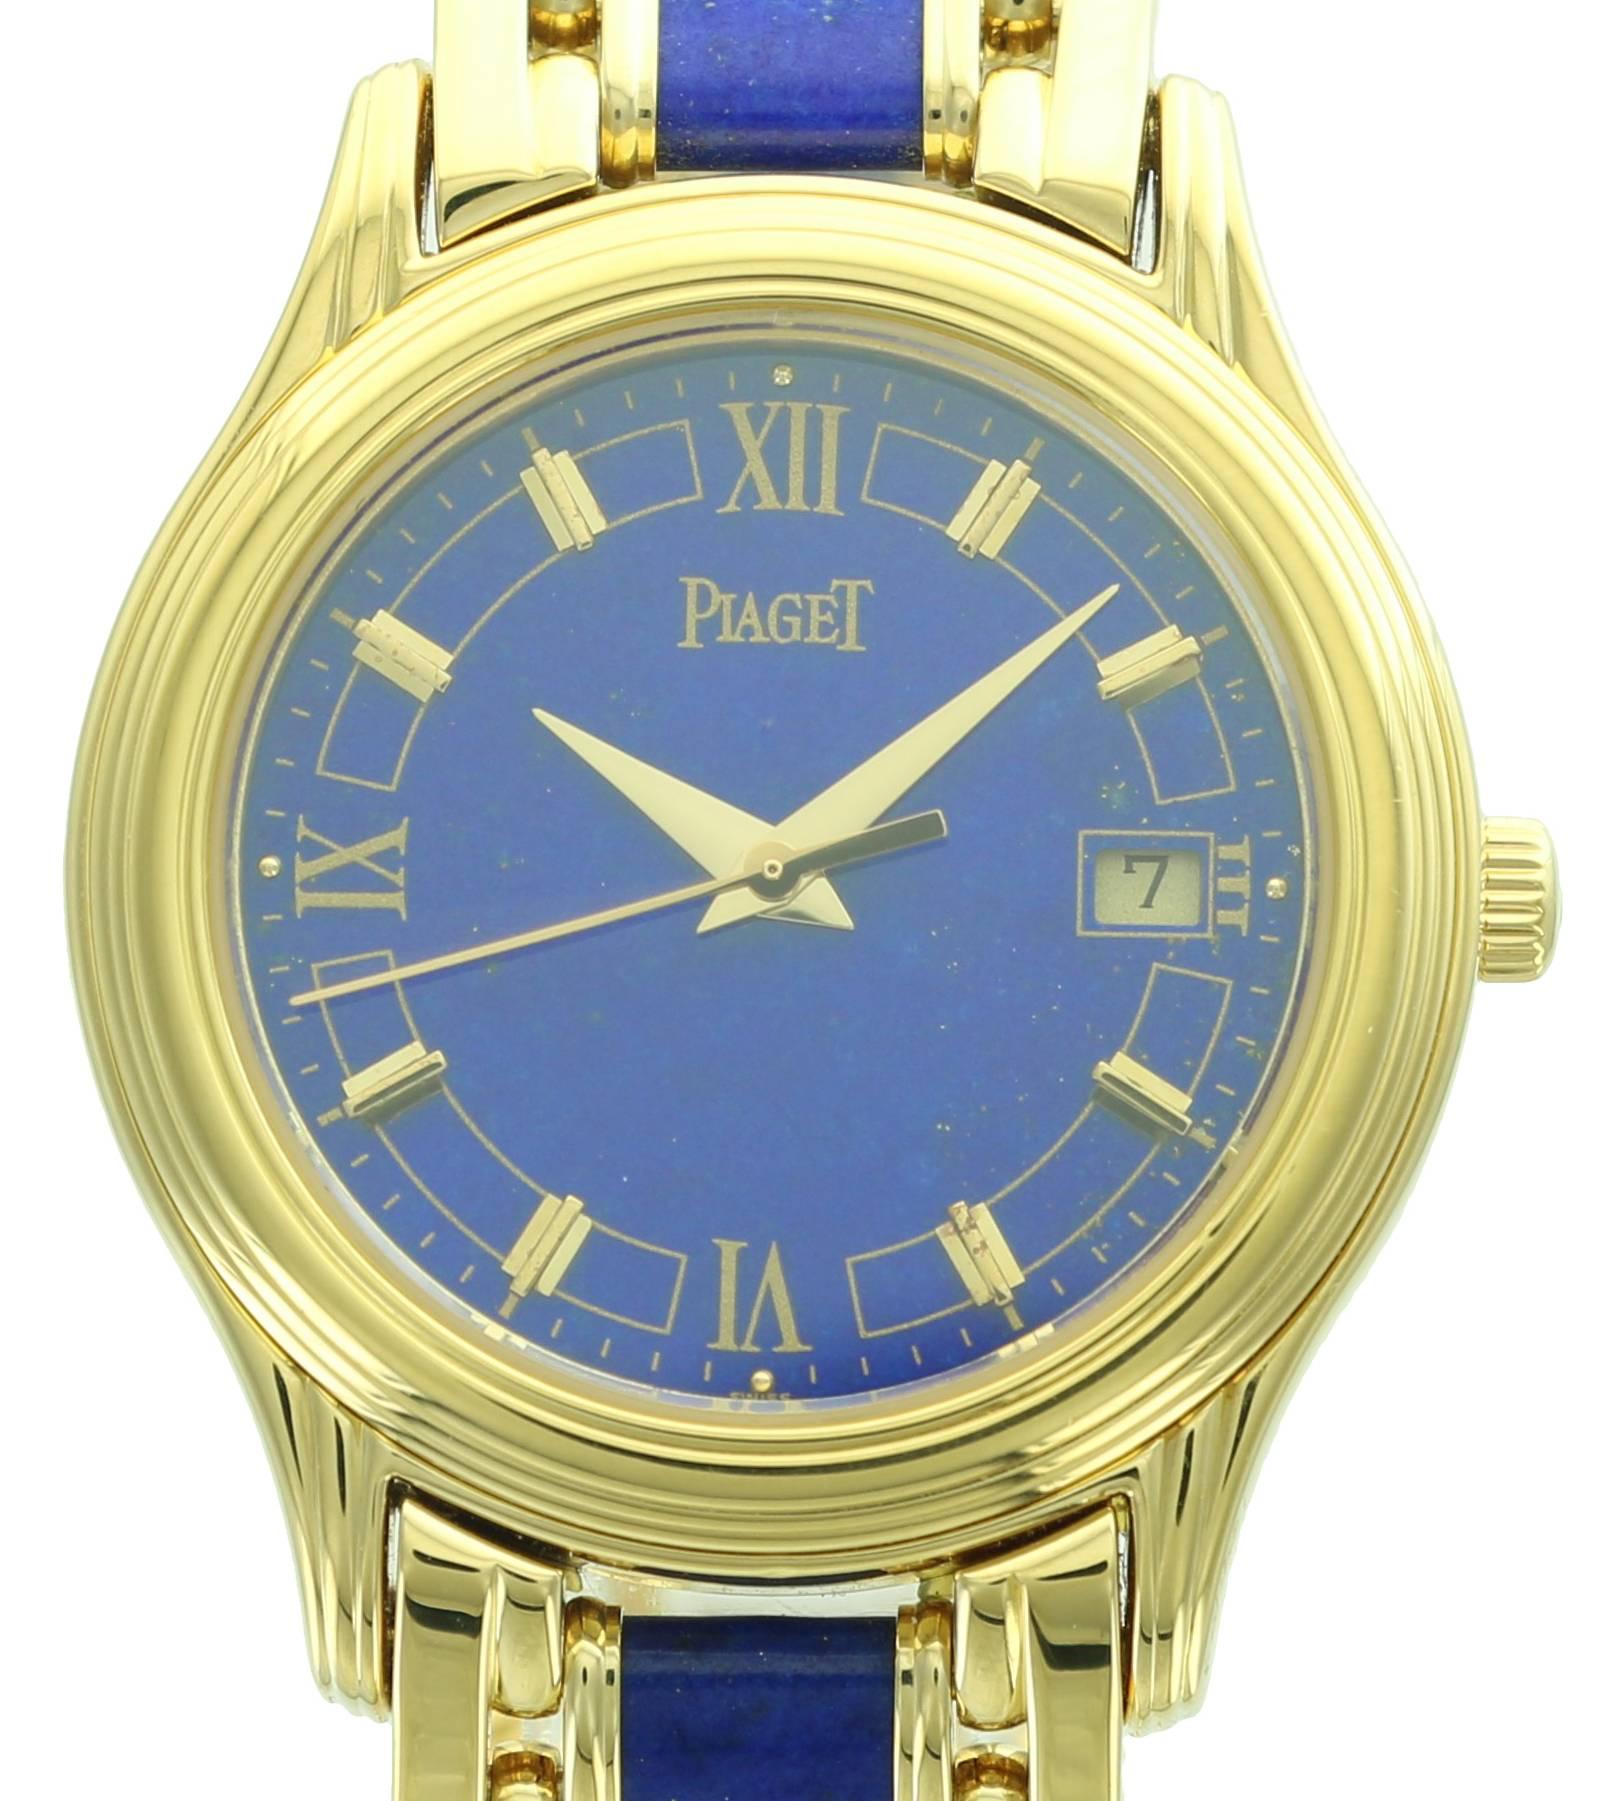 This beautiful Piaget watch, reference 23001, is particularly rare and beautiful as it is fitted with a lapis lazuli stone dial and yellow gold and lapis lazuli bracelet. The contrasting rich, deep blue and yellow gold make for a beautiful watch. 